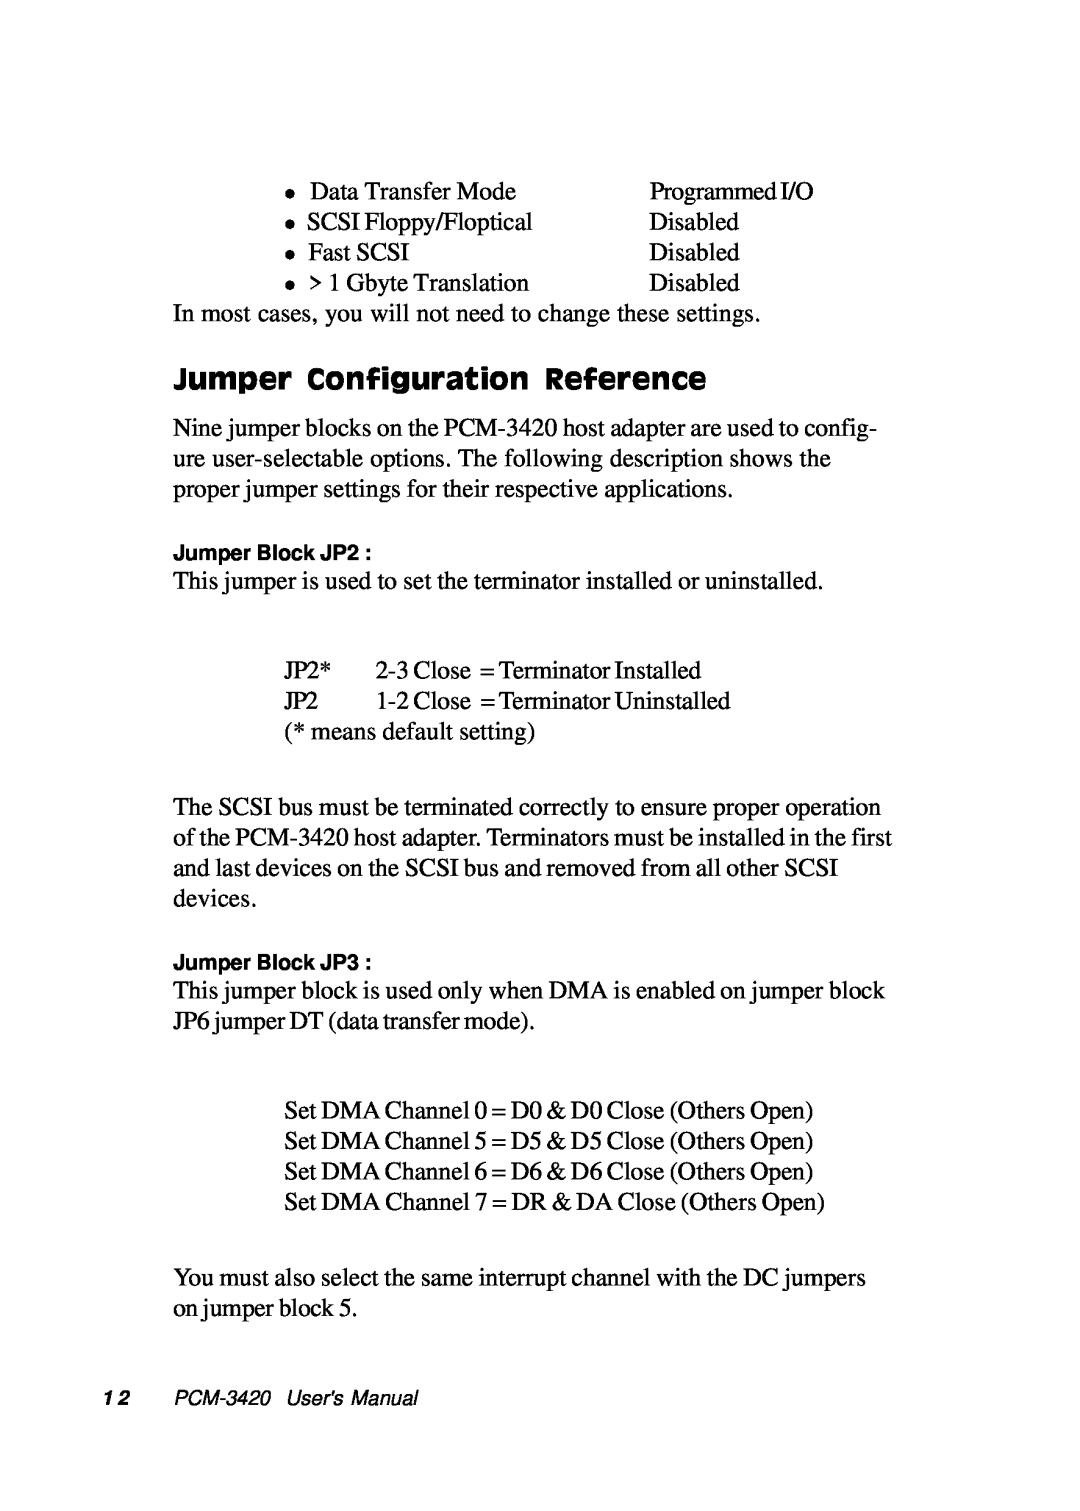 Adaptec PCM-3420, PC/104 manual Jumper Configuration Reference, = Terminator Uninstalled 